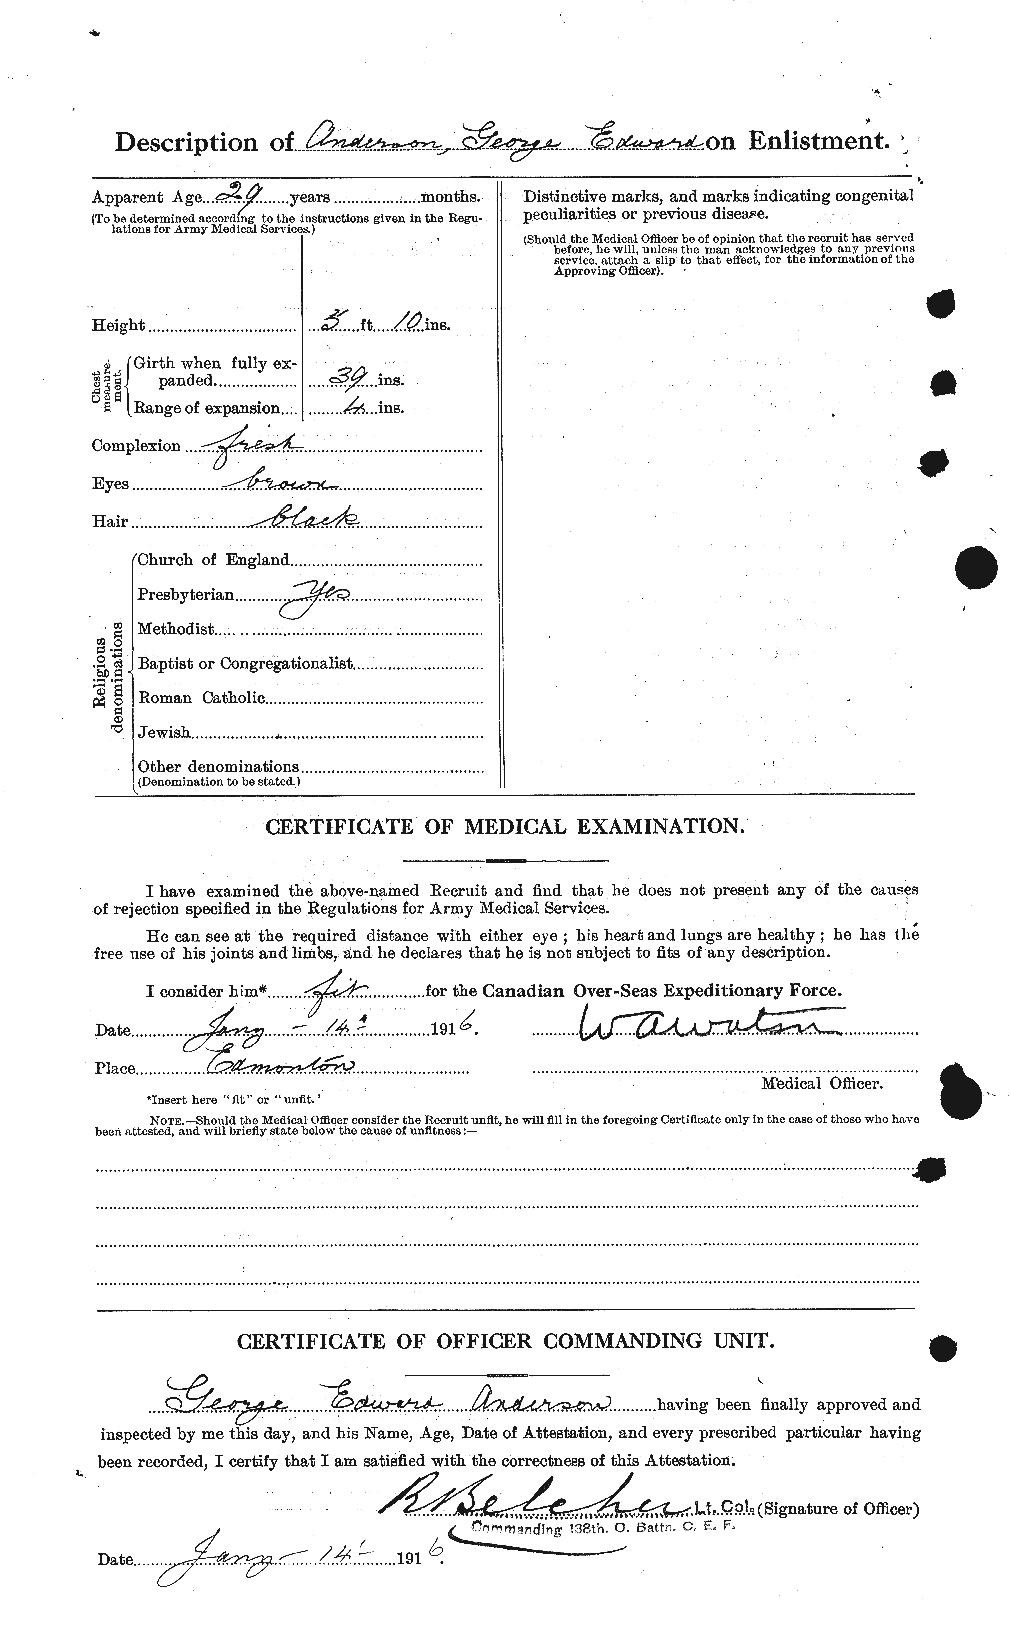 Personnel Records of the First World War - CEF 209732b